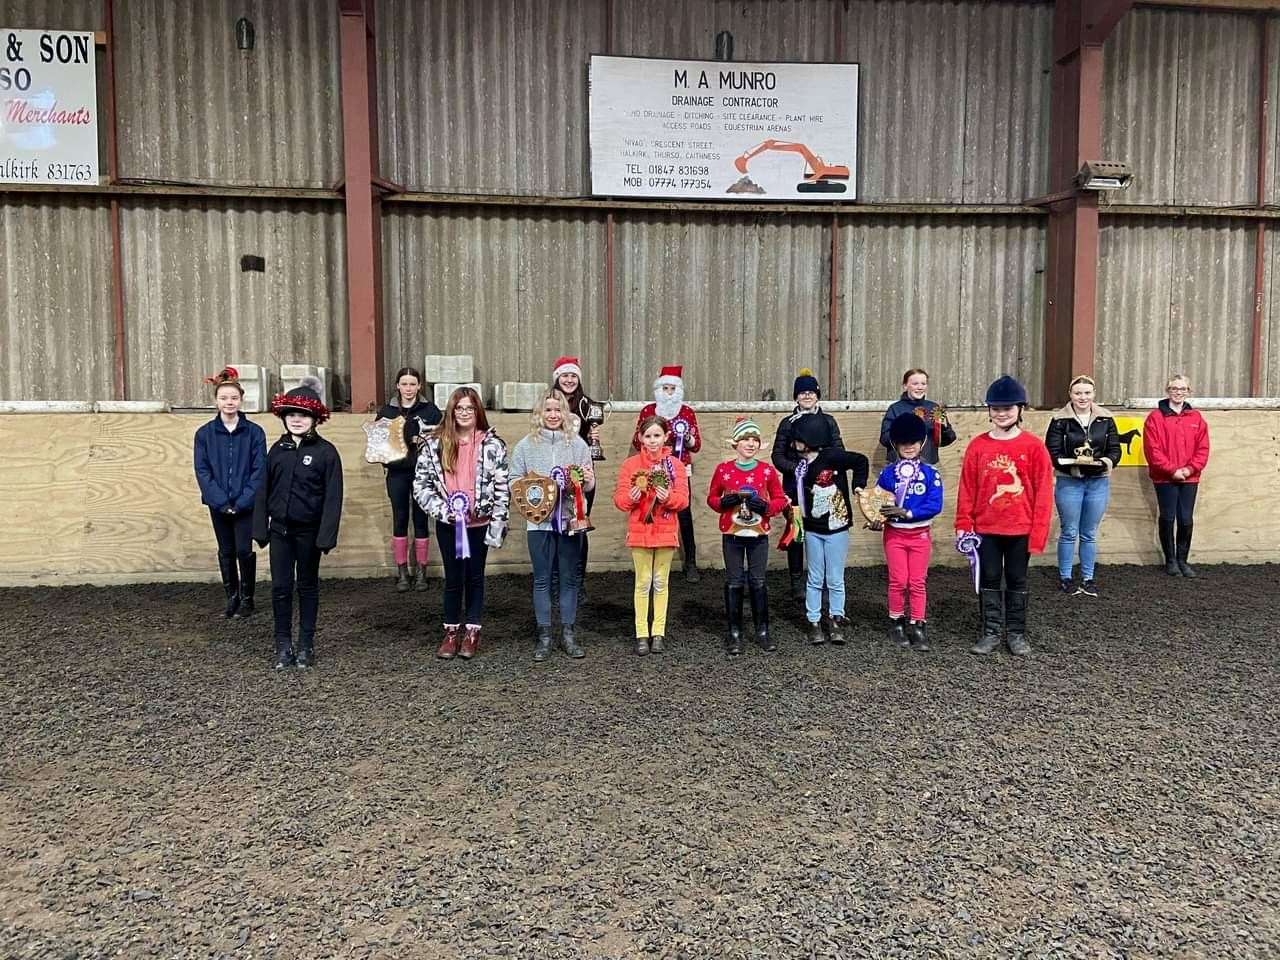 Some of the Caithness Pony Club members who were presented with awards and prizes on the day of the Christmas Show.